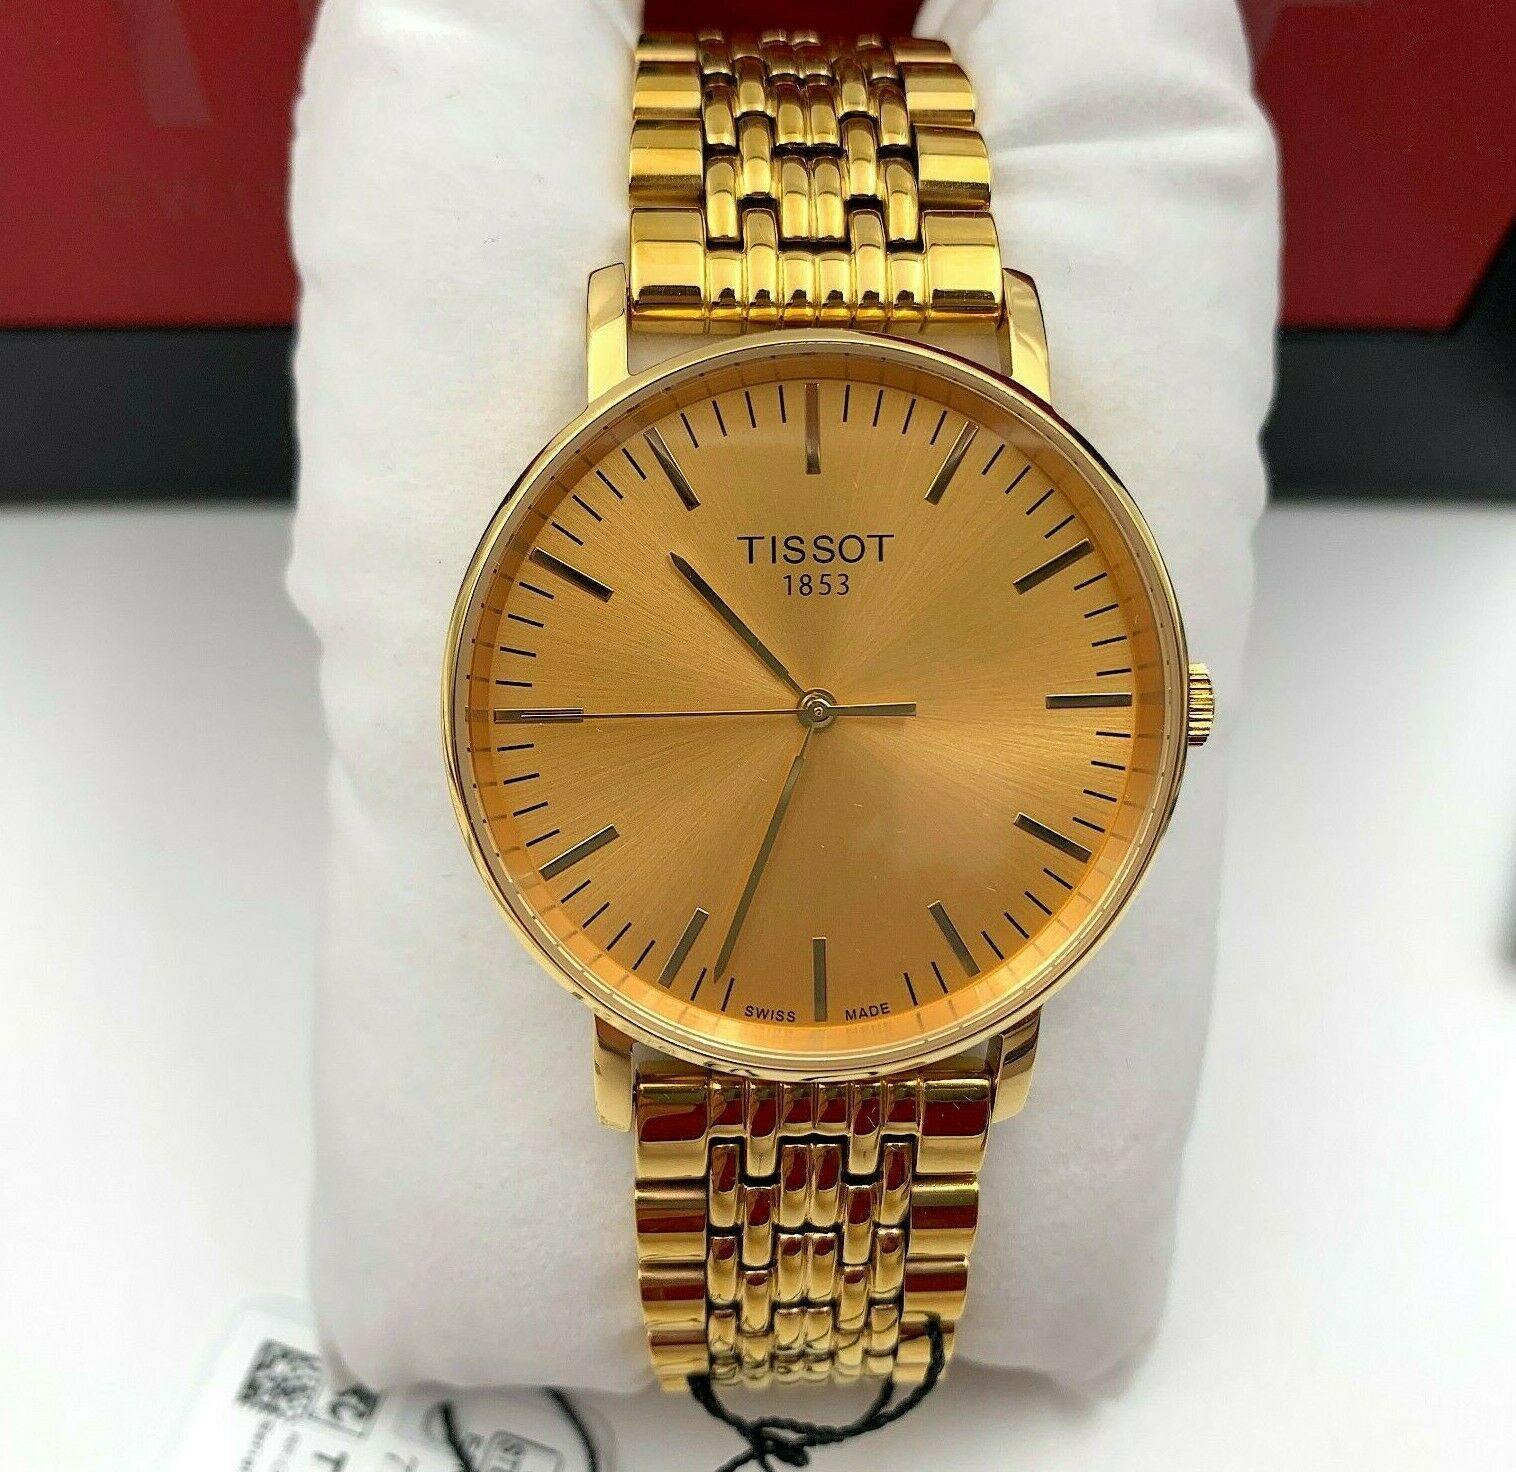 Tissot Swiss Made T-Classic Everytime All Gold Plated Men's Watch T1094103302100 - Prestige